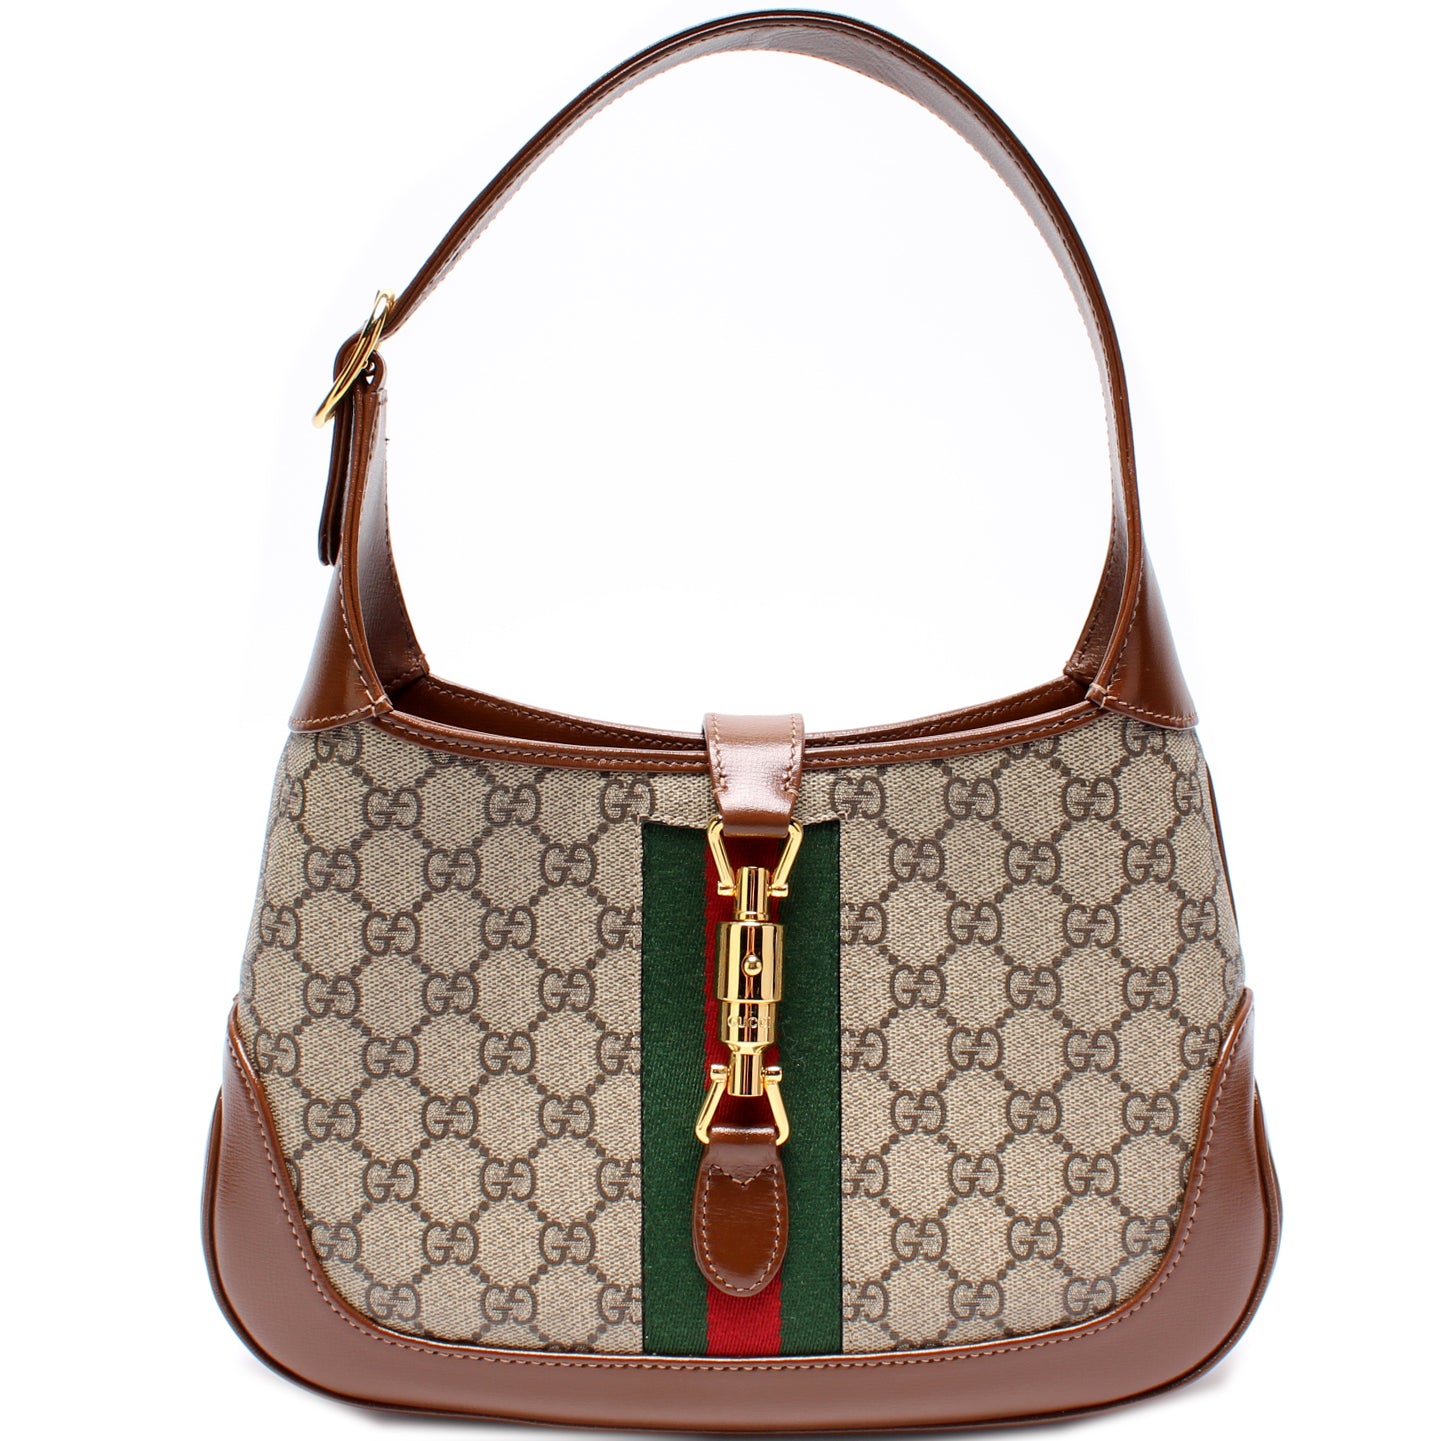 Gucci Jackie 1961 in red leather question : r/handbags